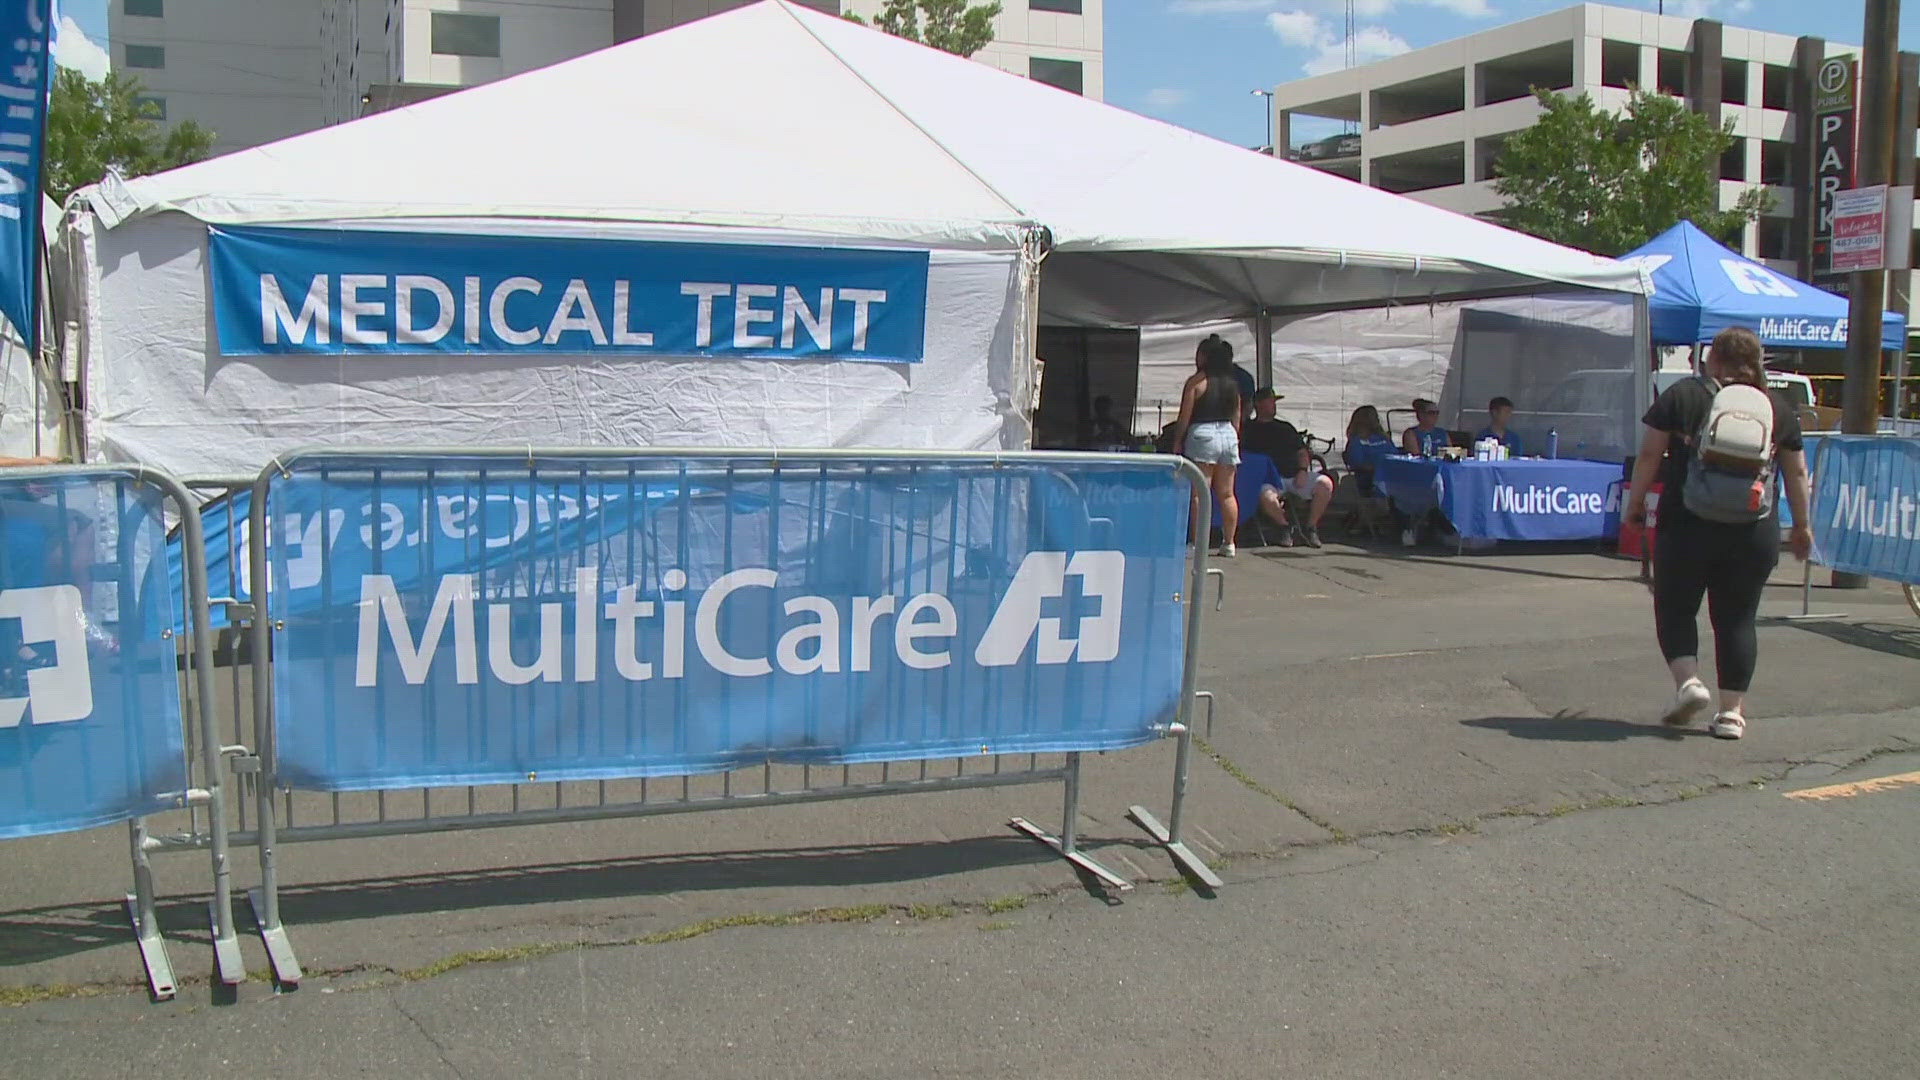 Both players and spectators will have access to the Hoopfest medical experts.